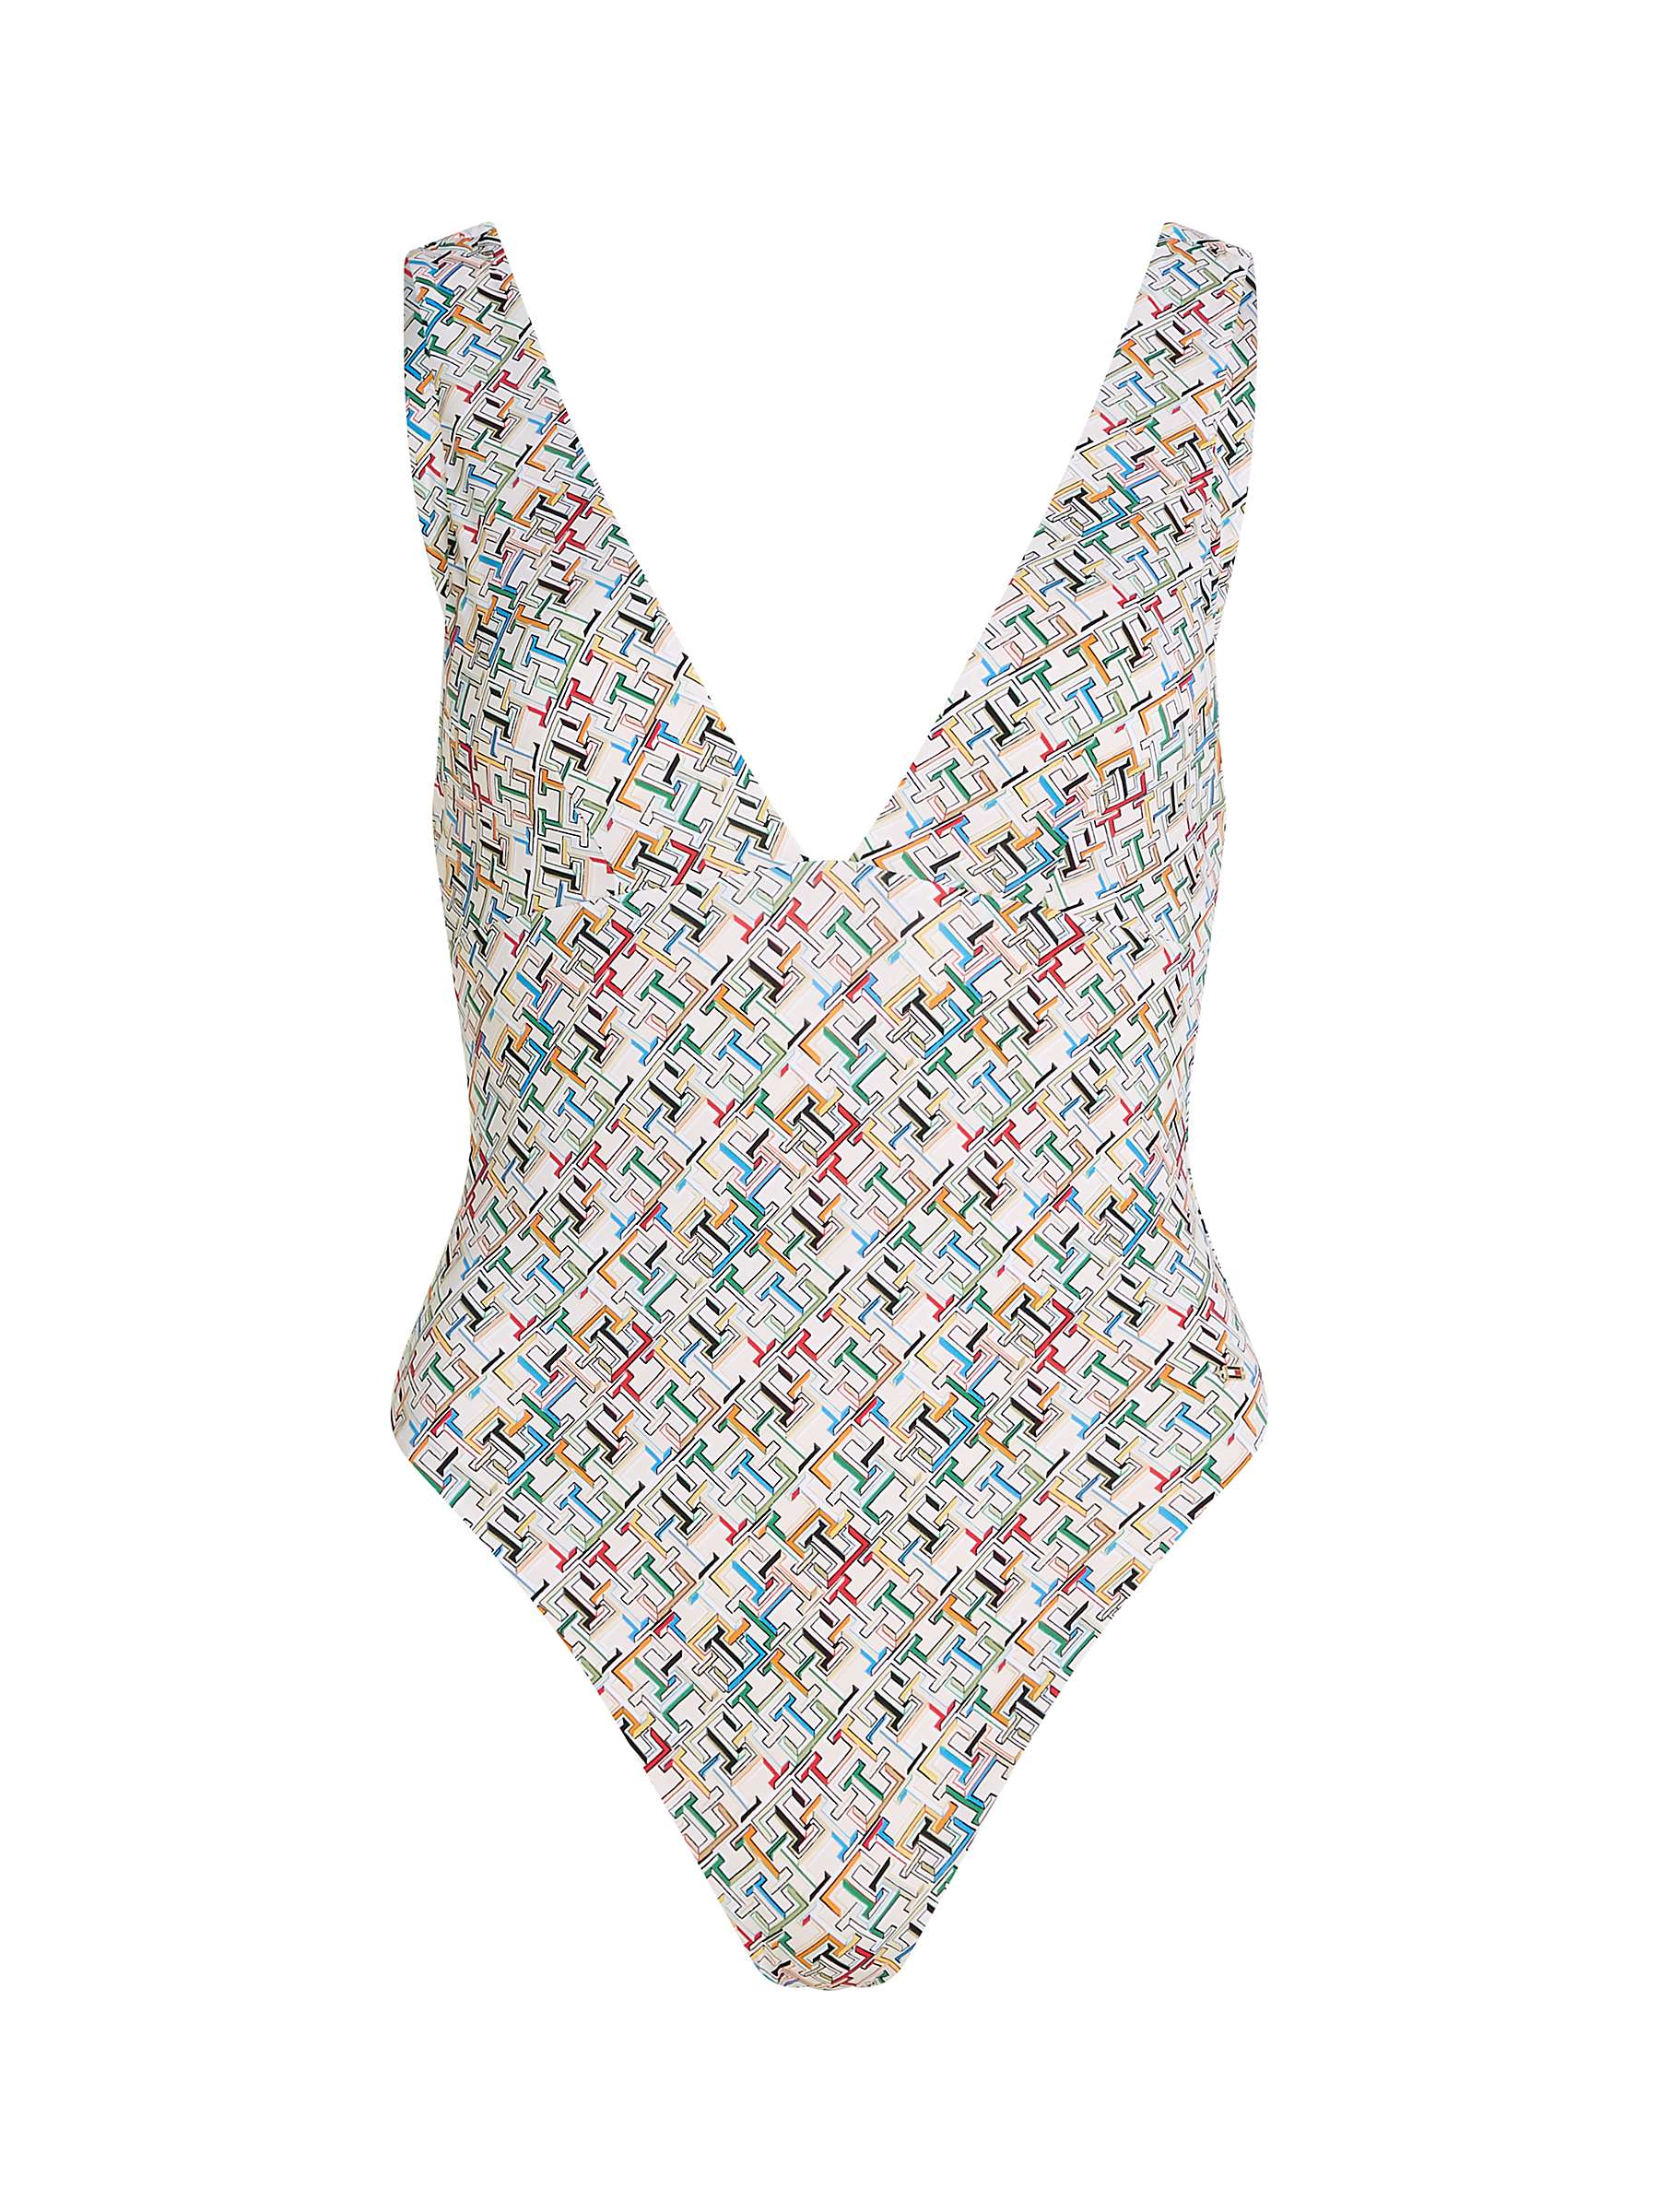 Buy Tommy Hilfiger Plunge Swimsuit, Multi Mon Calico Online at johnlewis.com